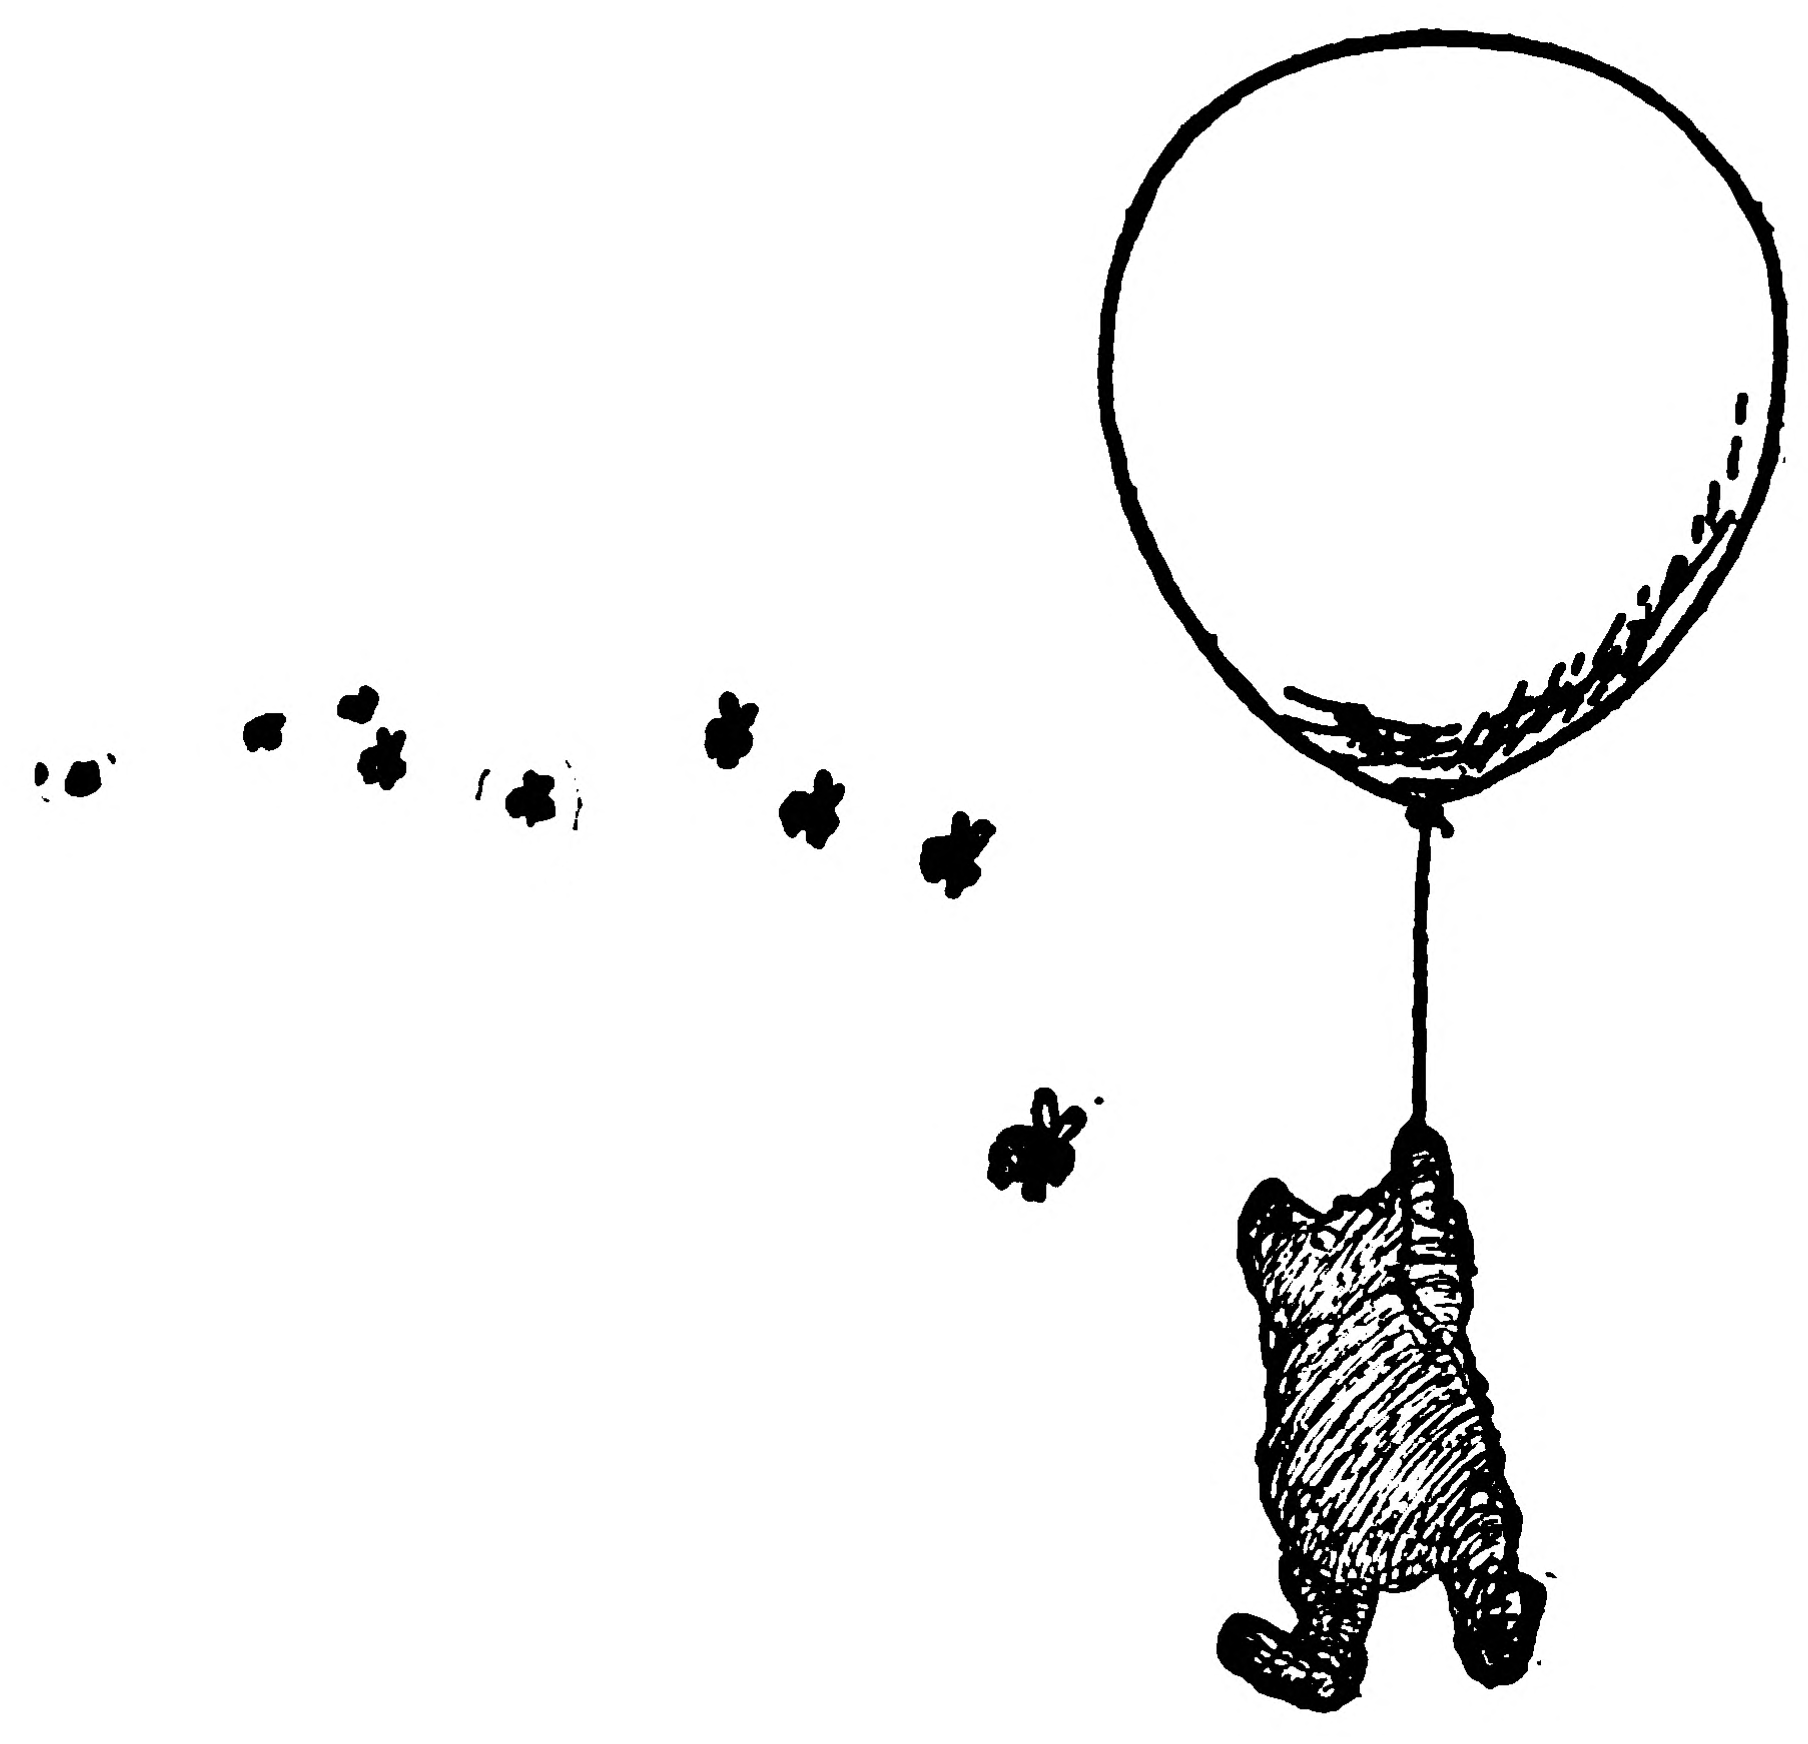 Pooh with a balloon (1920s) | E H Shepard | Vintage Winnie the Pooh pictures Posters, Prints, & Visual Artwork The Trumpet Shop Vintage Prints   